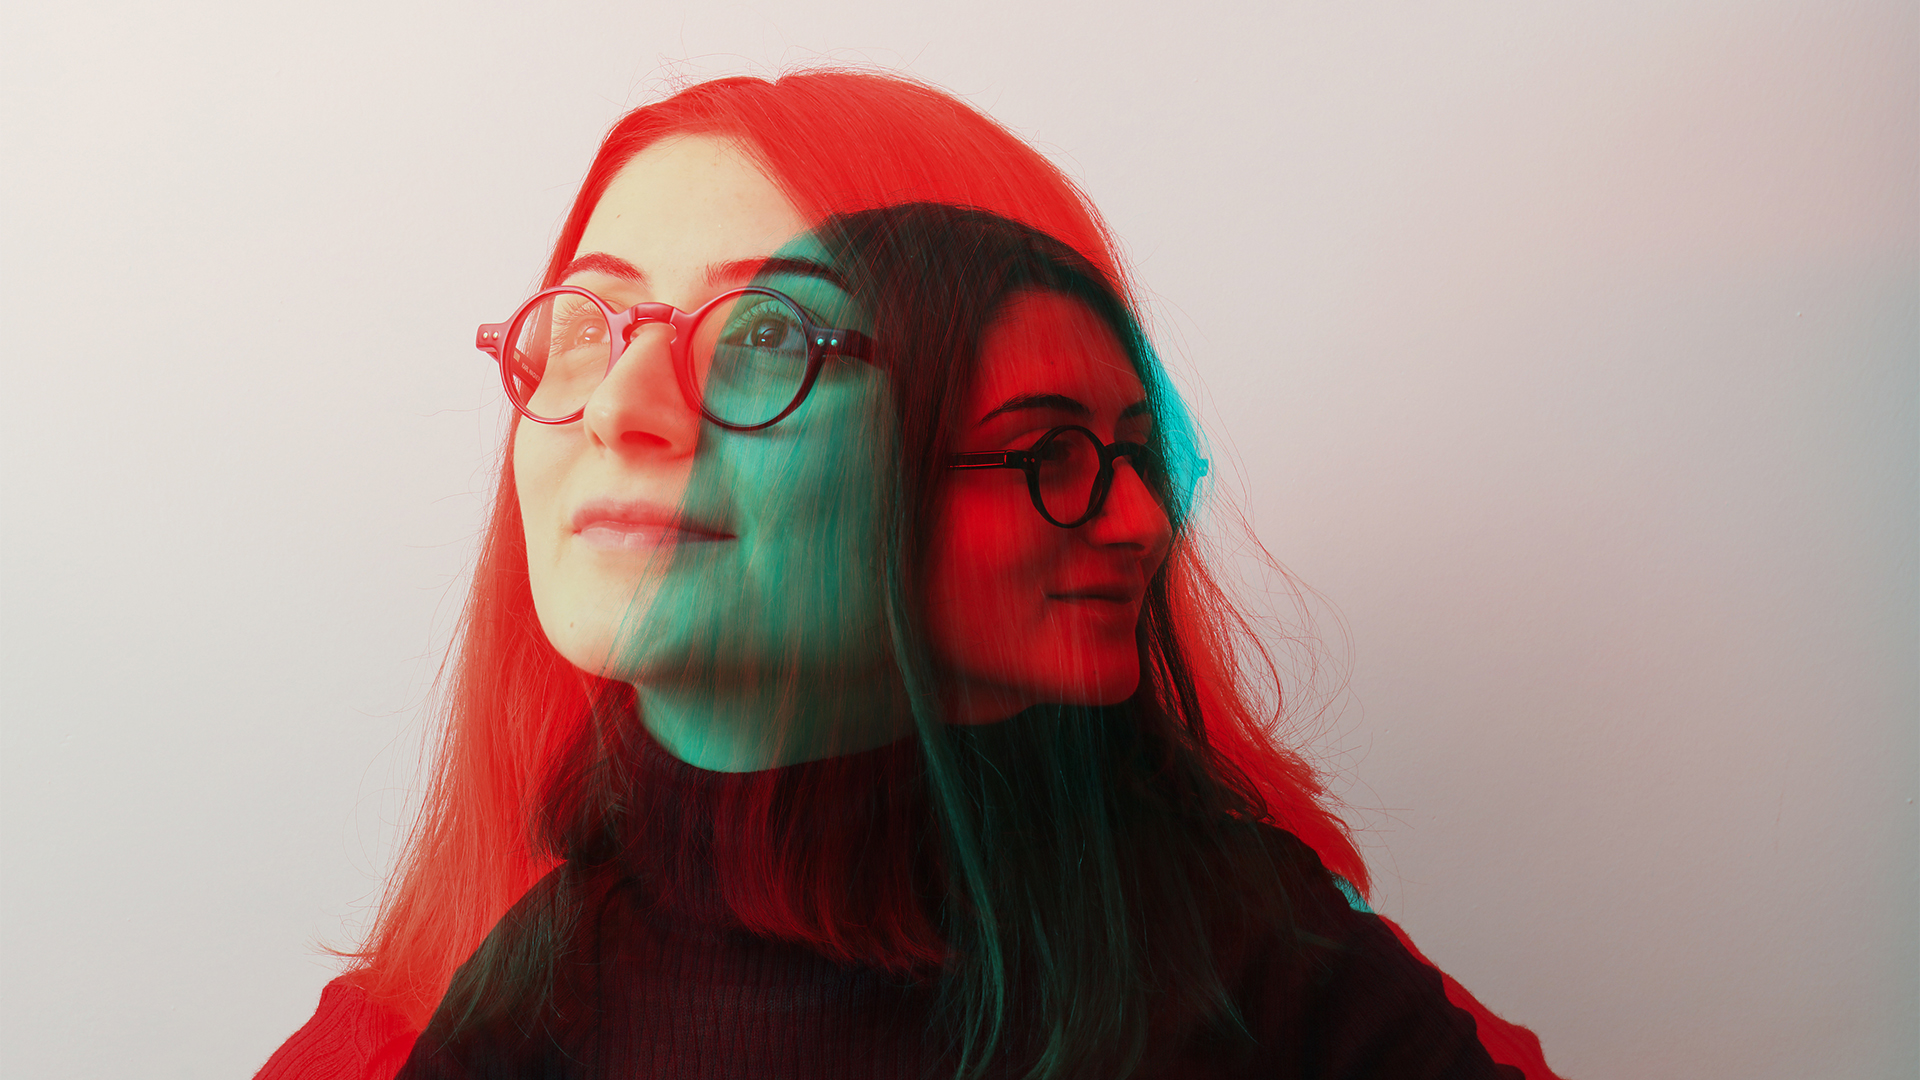 A double exposed image of a woman with glasses with a 3-D effect applied